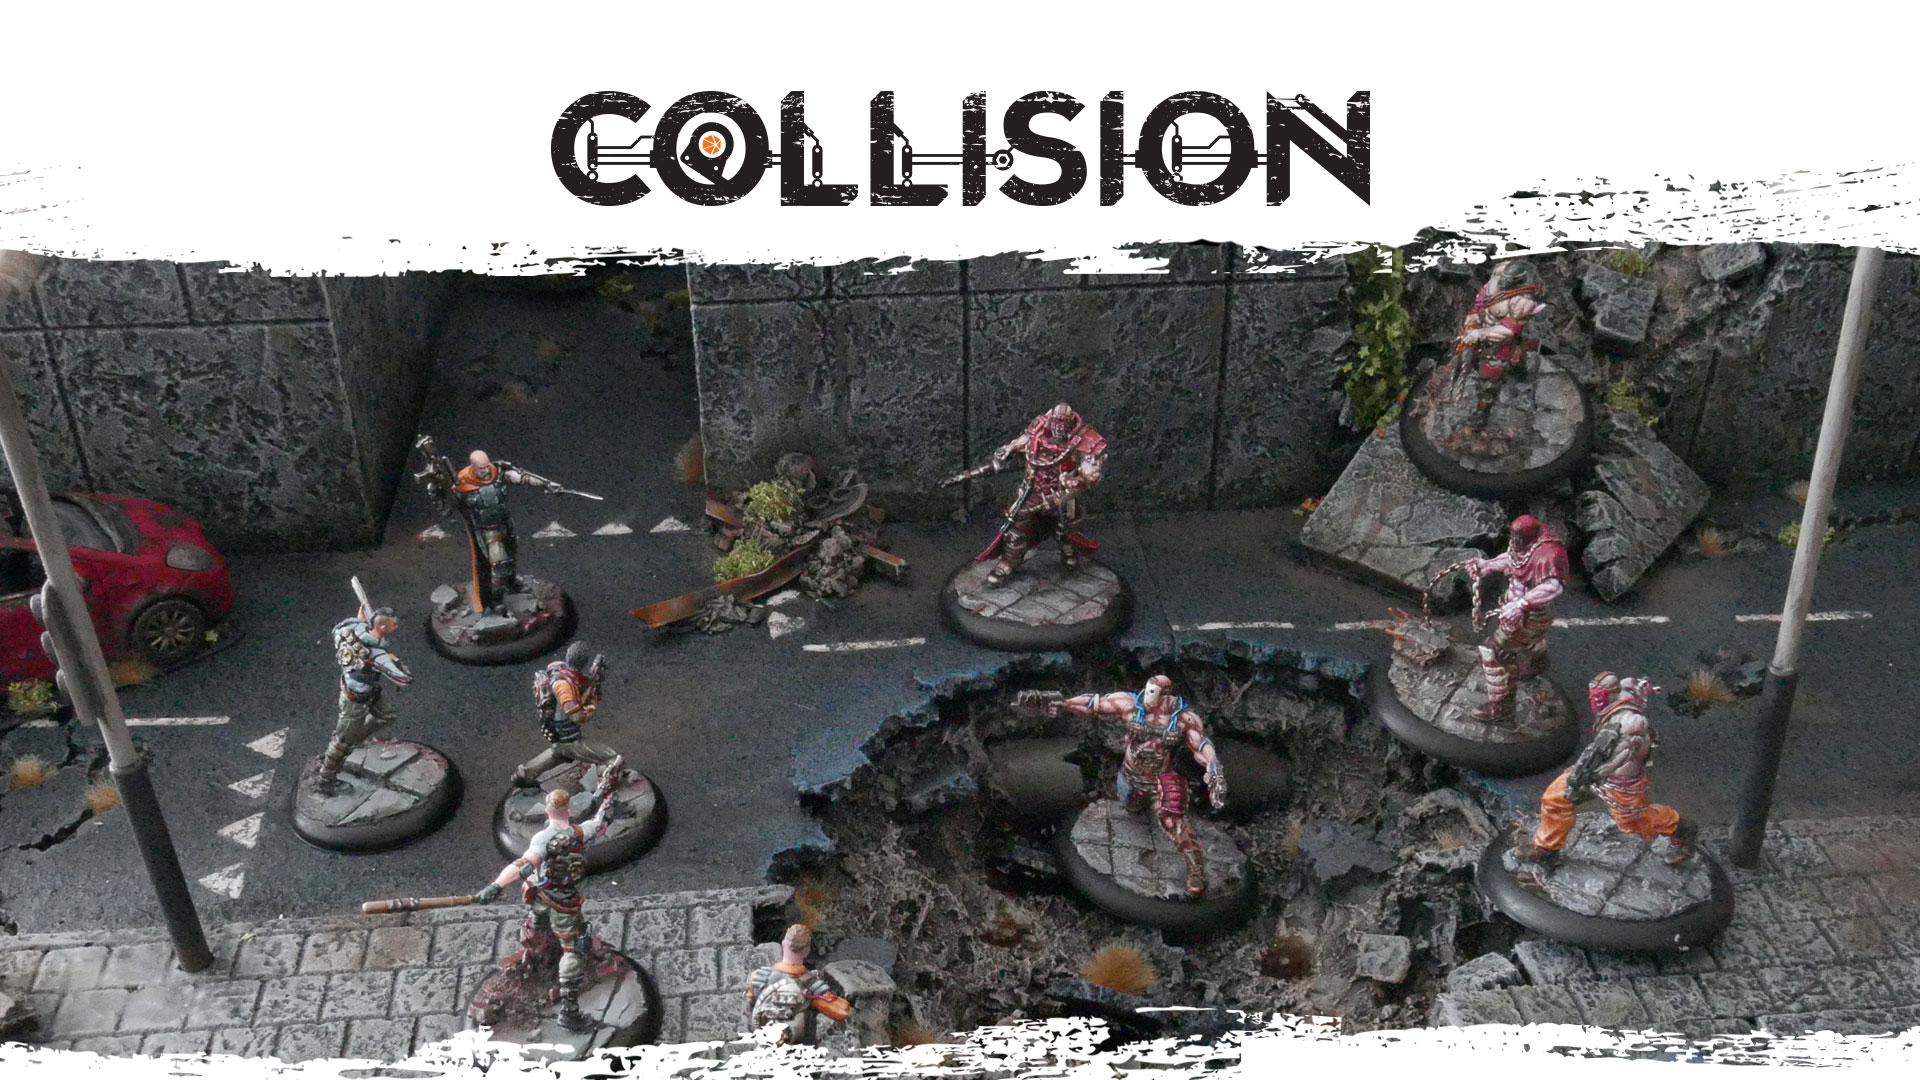 Now that our current Kickstarter is so close to shipping, we have been brainstorming about our next step for Collision. We are planning a new Kickstarter to extend the current range of models. And we want you to be more involved in the process! We have loads of cool ideas and we would like your opinion on what we should do next: